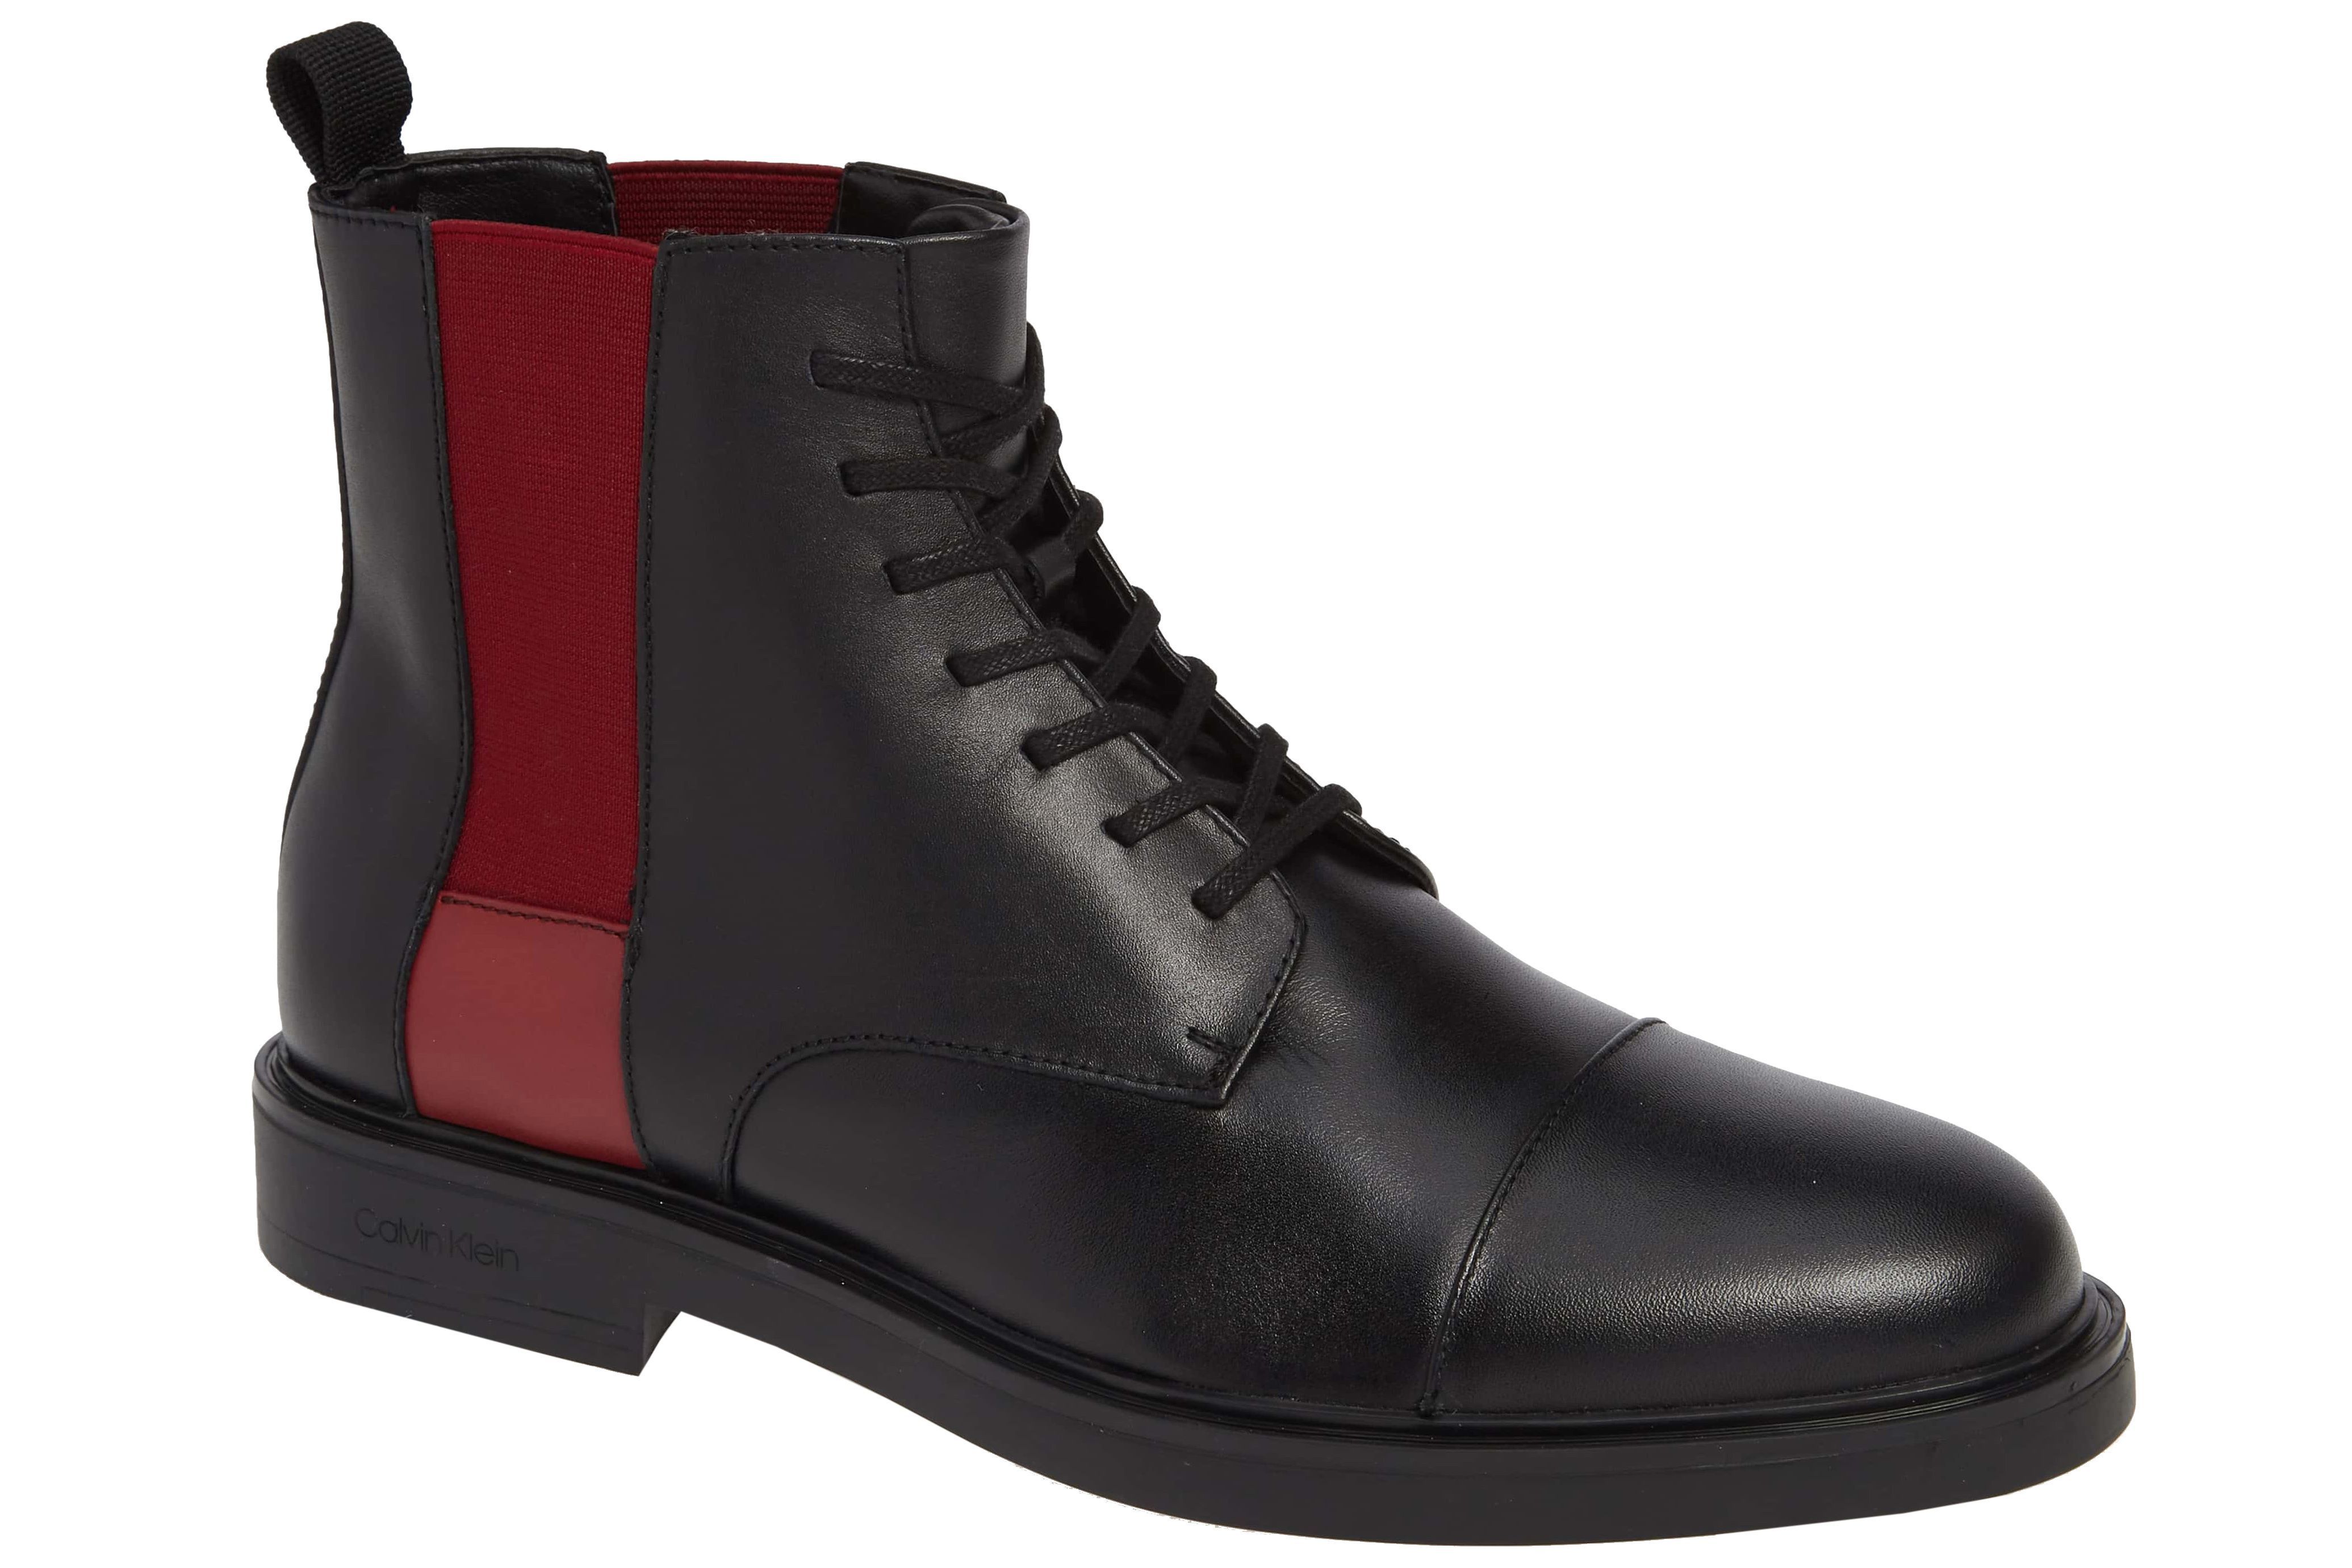 Boots You Can Wear with a Suit Winter 